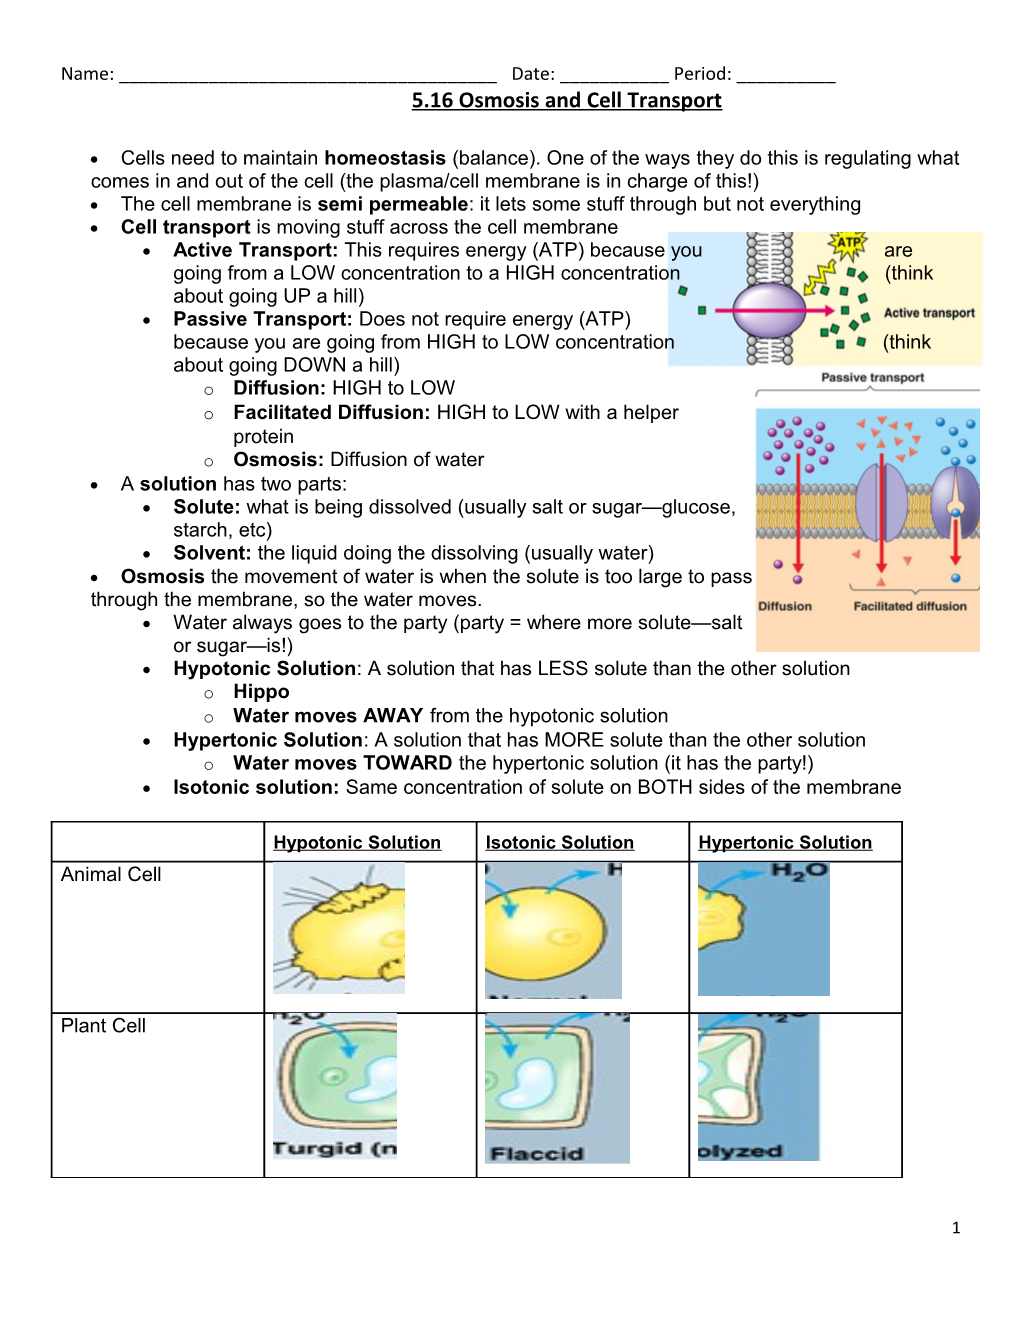 5.16 Osmosis and Cell Transport